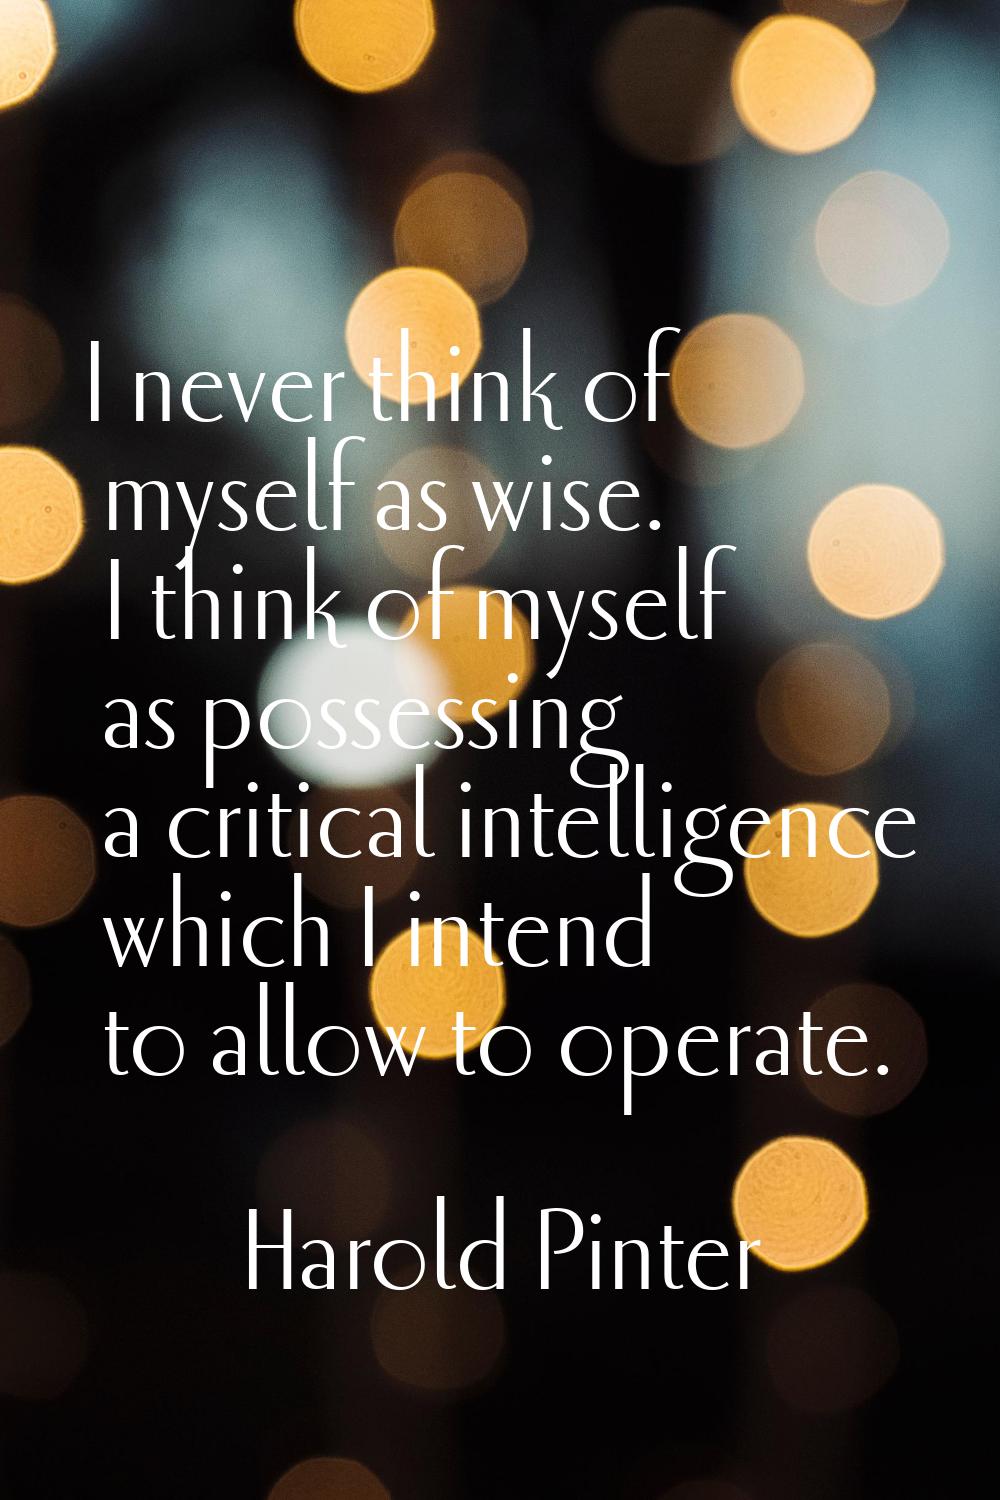 I never think of myself as wise. I think of myself as possessing a critical intelligence which I in